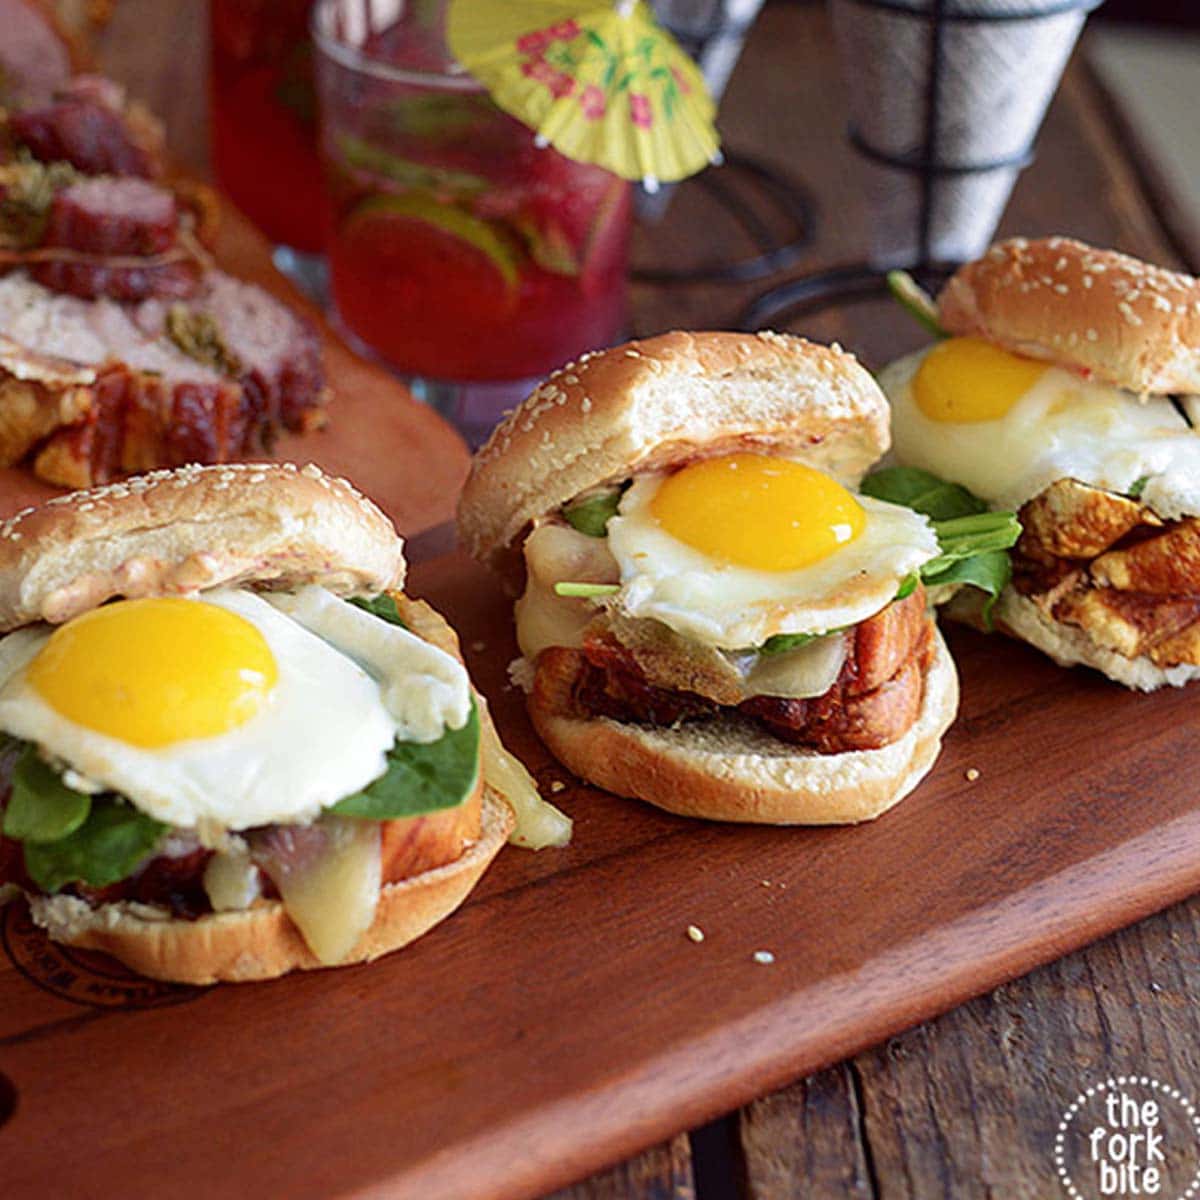 This roasted porchetta egg sandwich is the ultimate breakfast or brunch with flavorful porchetta, melted cheese, and a gooey fried egg on a bun or bagel.